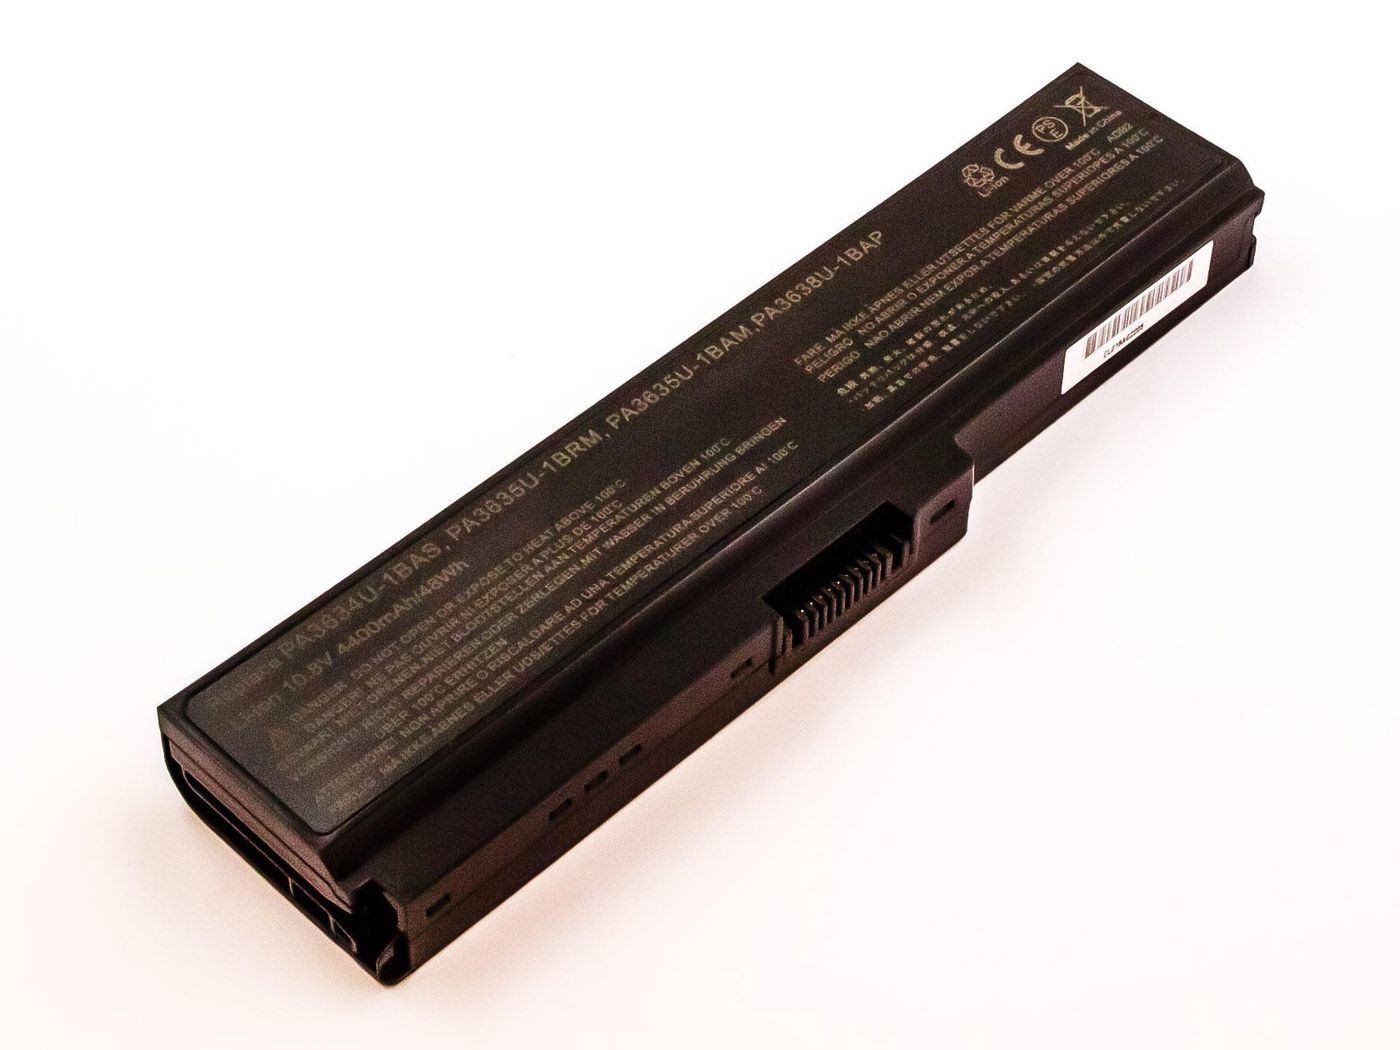 CoreParts Mbi2078 Notebook Spare Part Battery (Laptop Battery For Toshiba - 48Wh 6 Cell Li-Ion 10.8V 4.4Ah - Warranty: 12M)